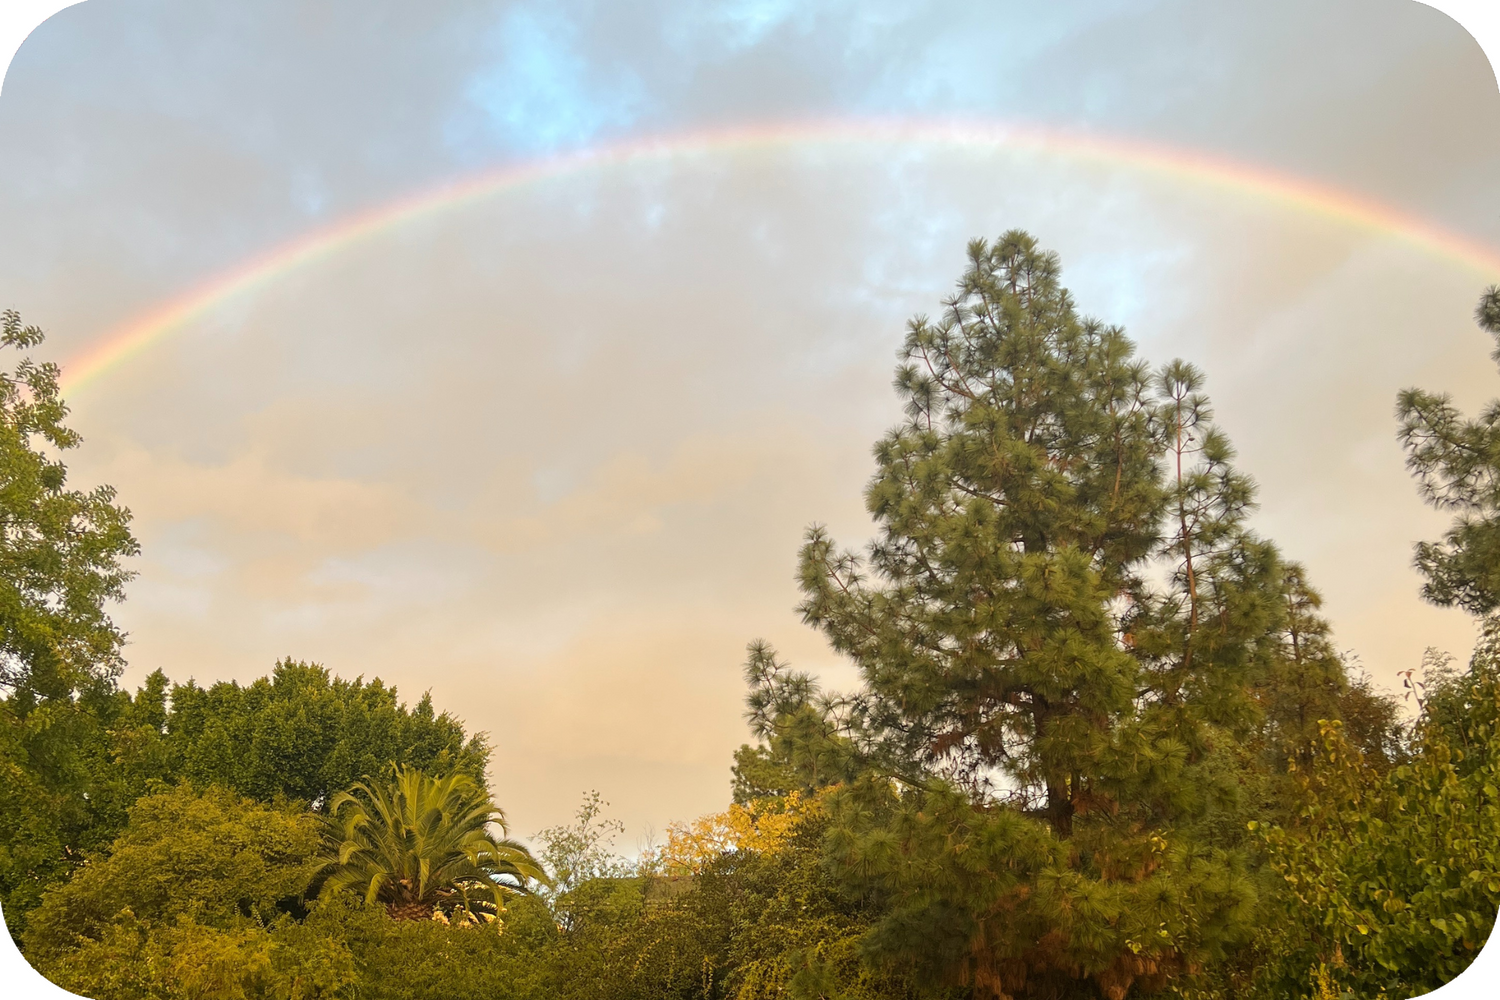 Rainbow in the sky over pine trees